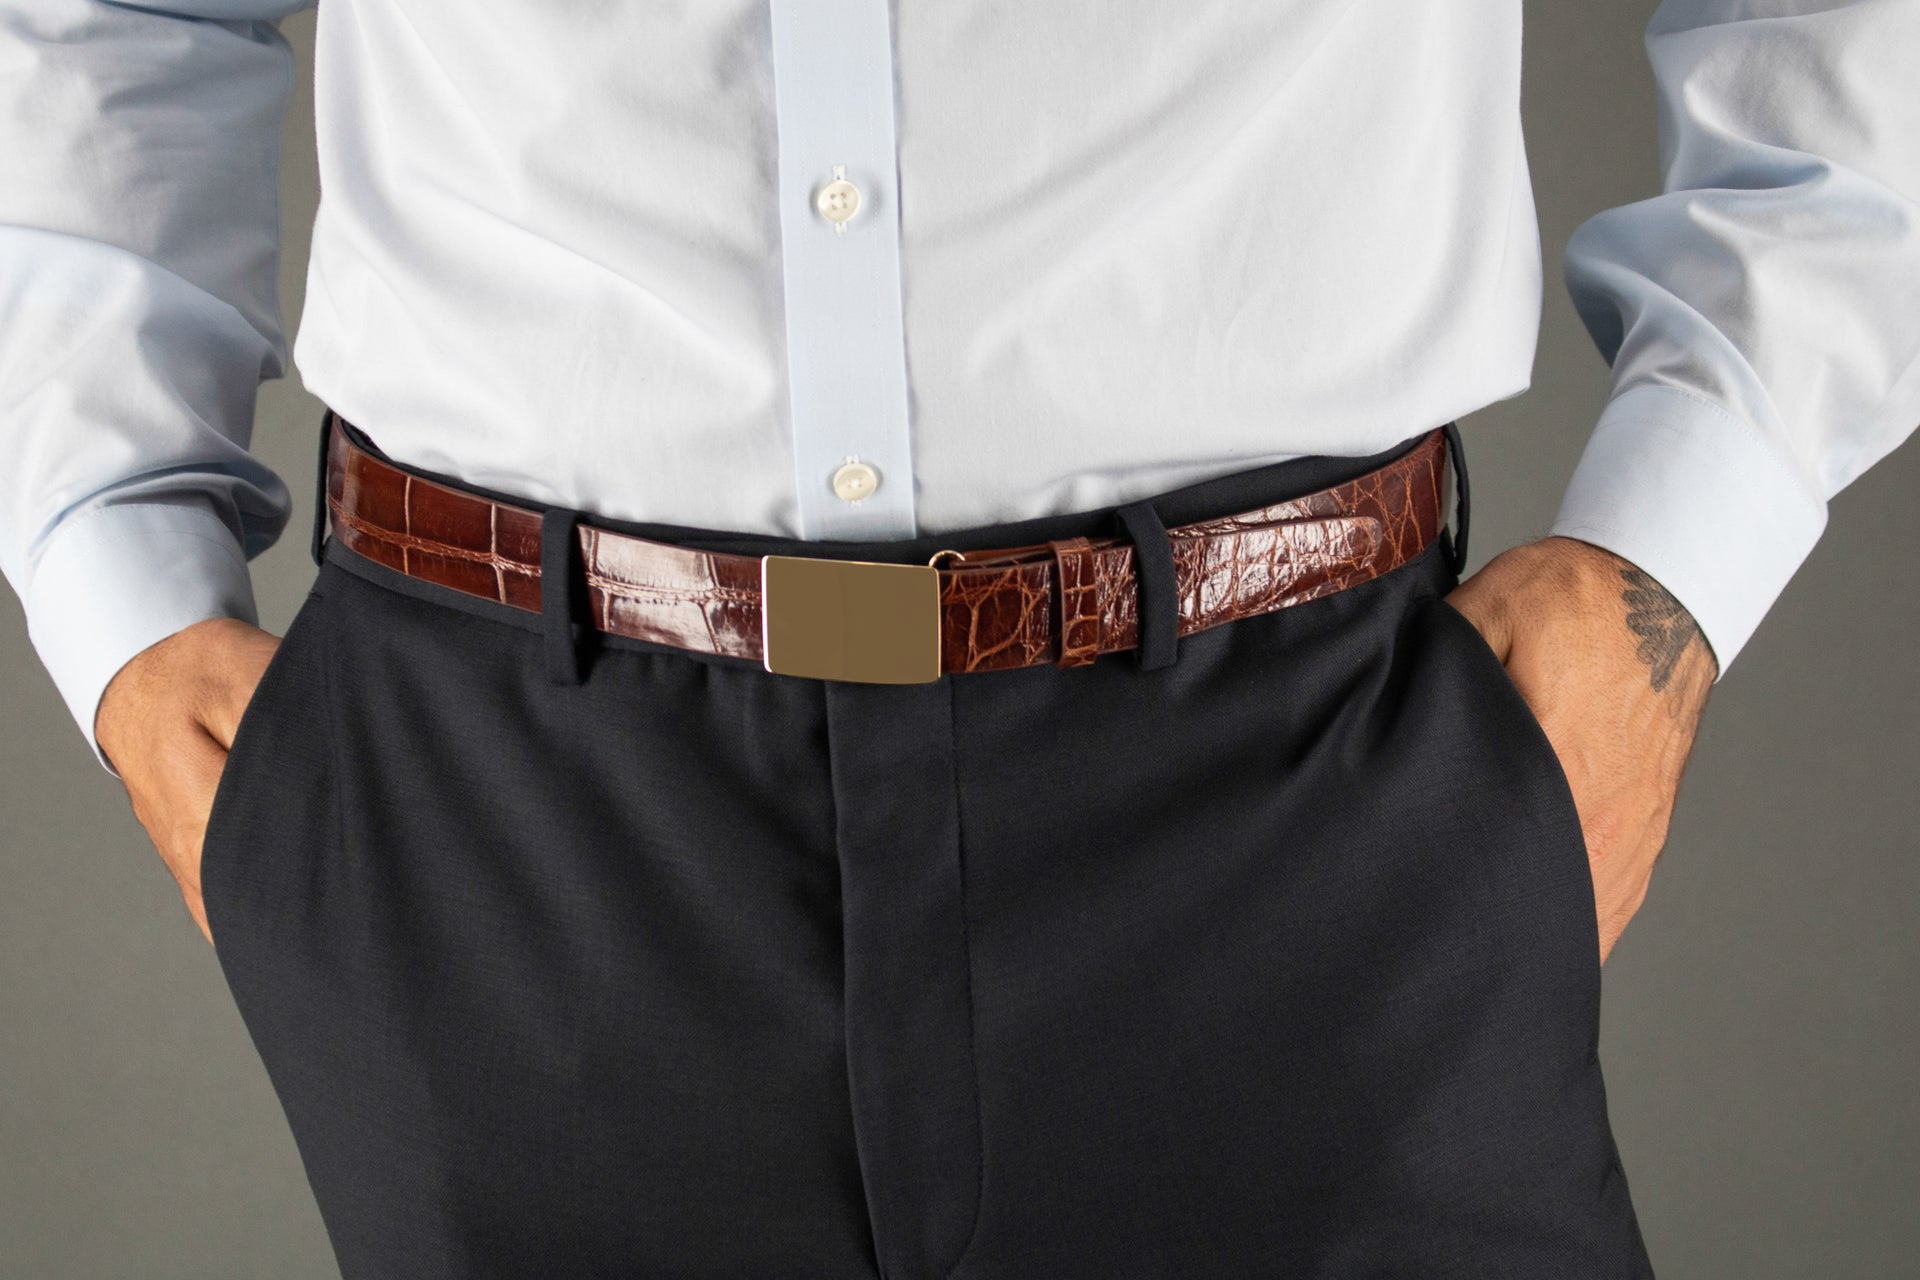 How to Find Your Correct Belt Size